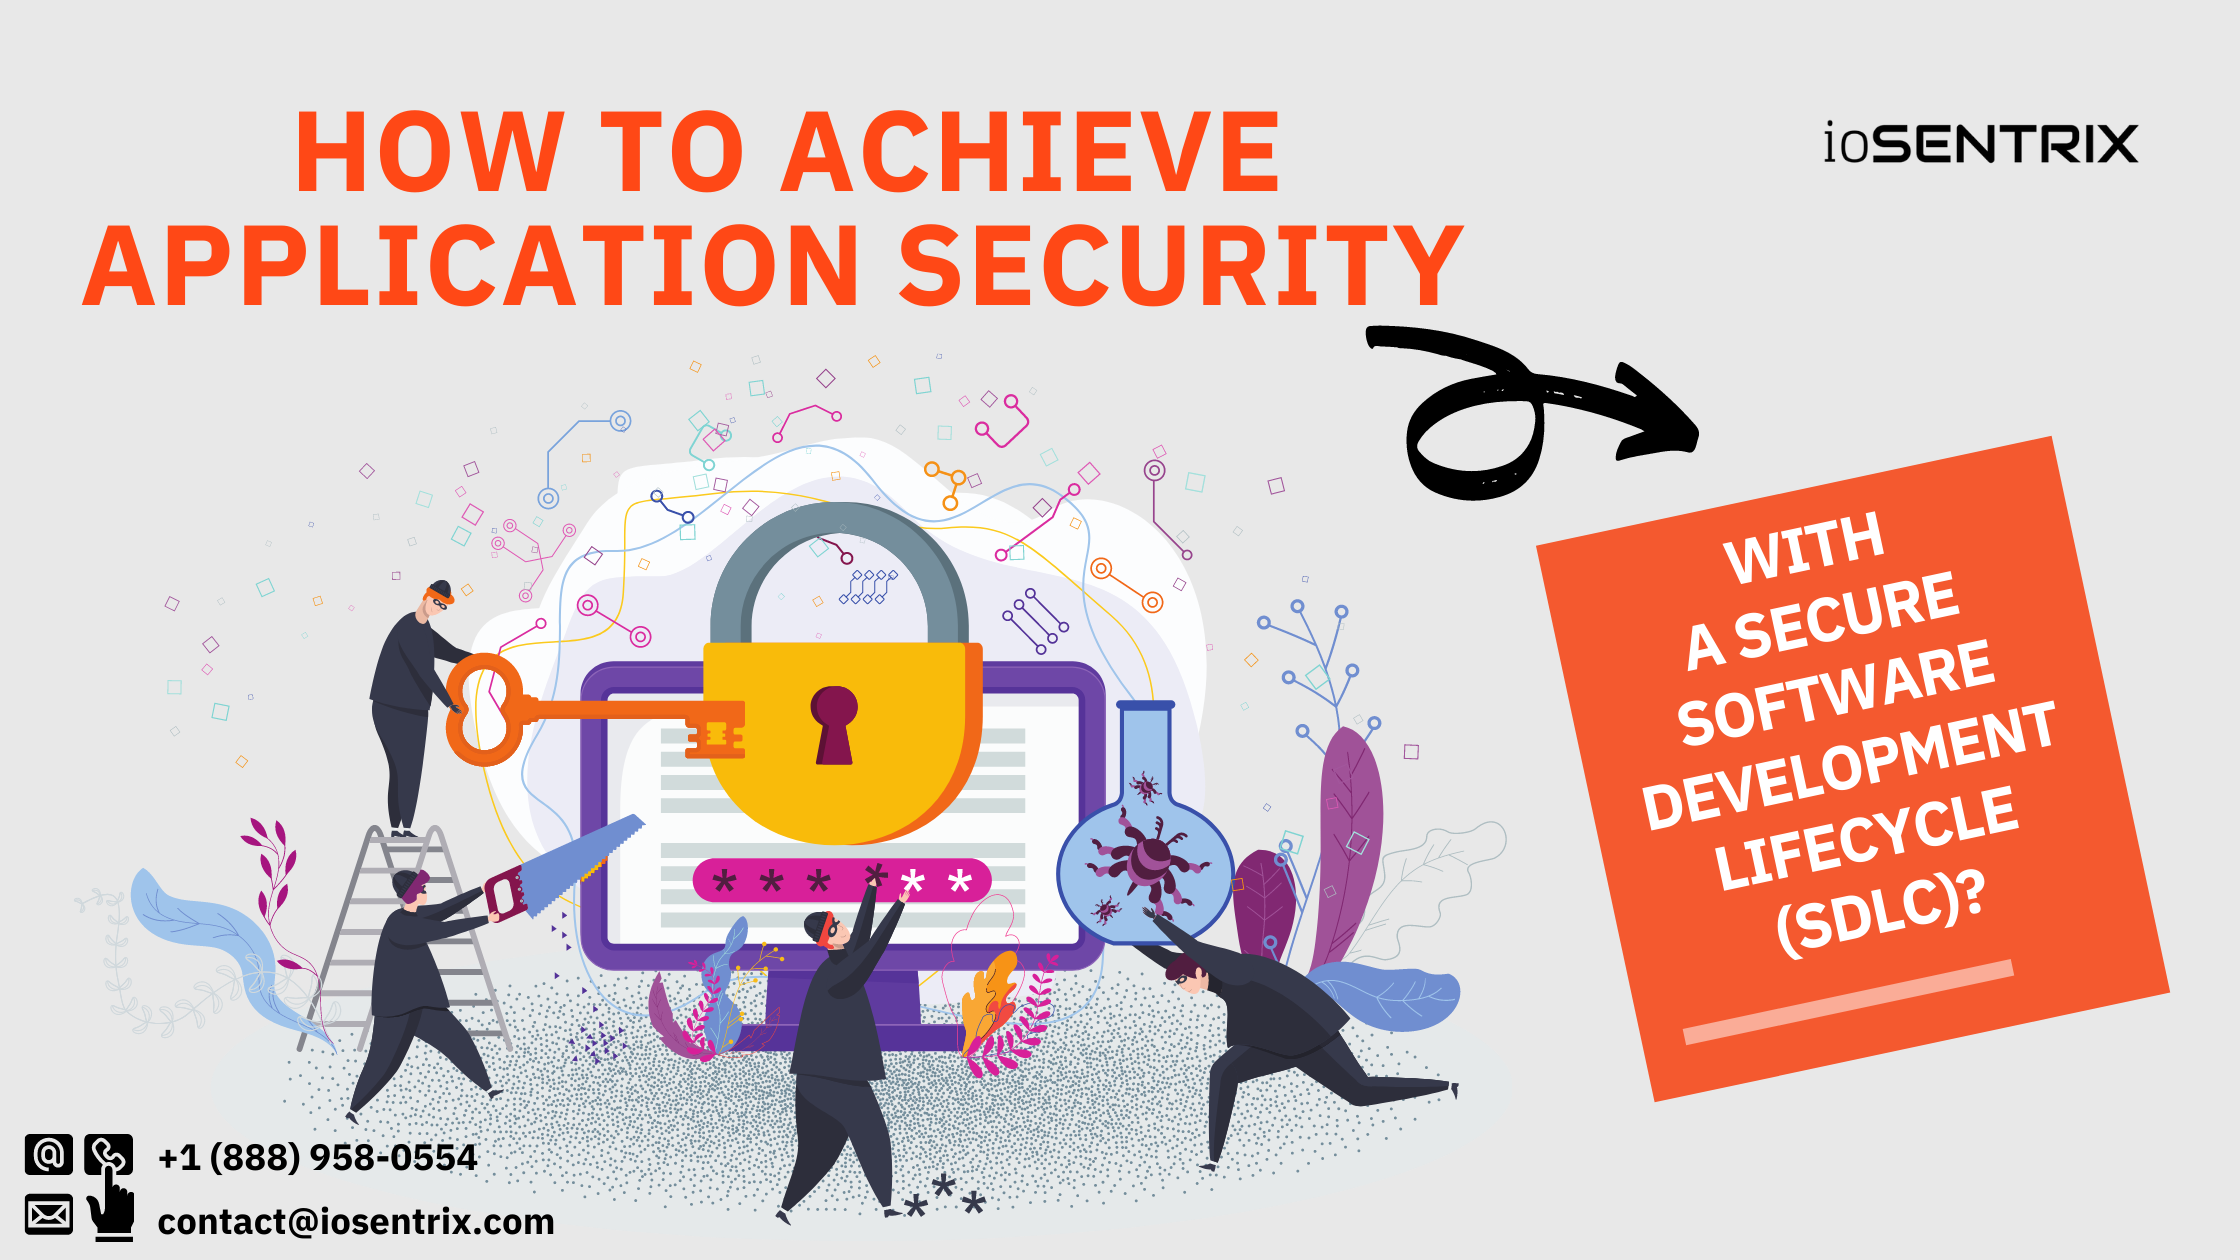 How to achieve application security with a secure software development lifecycle (SDLC)?